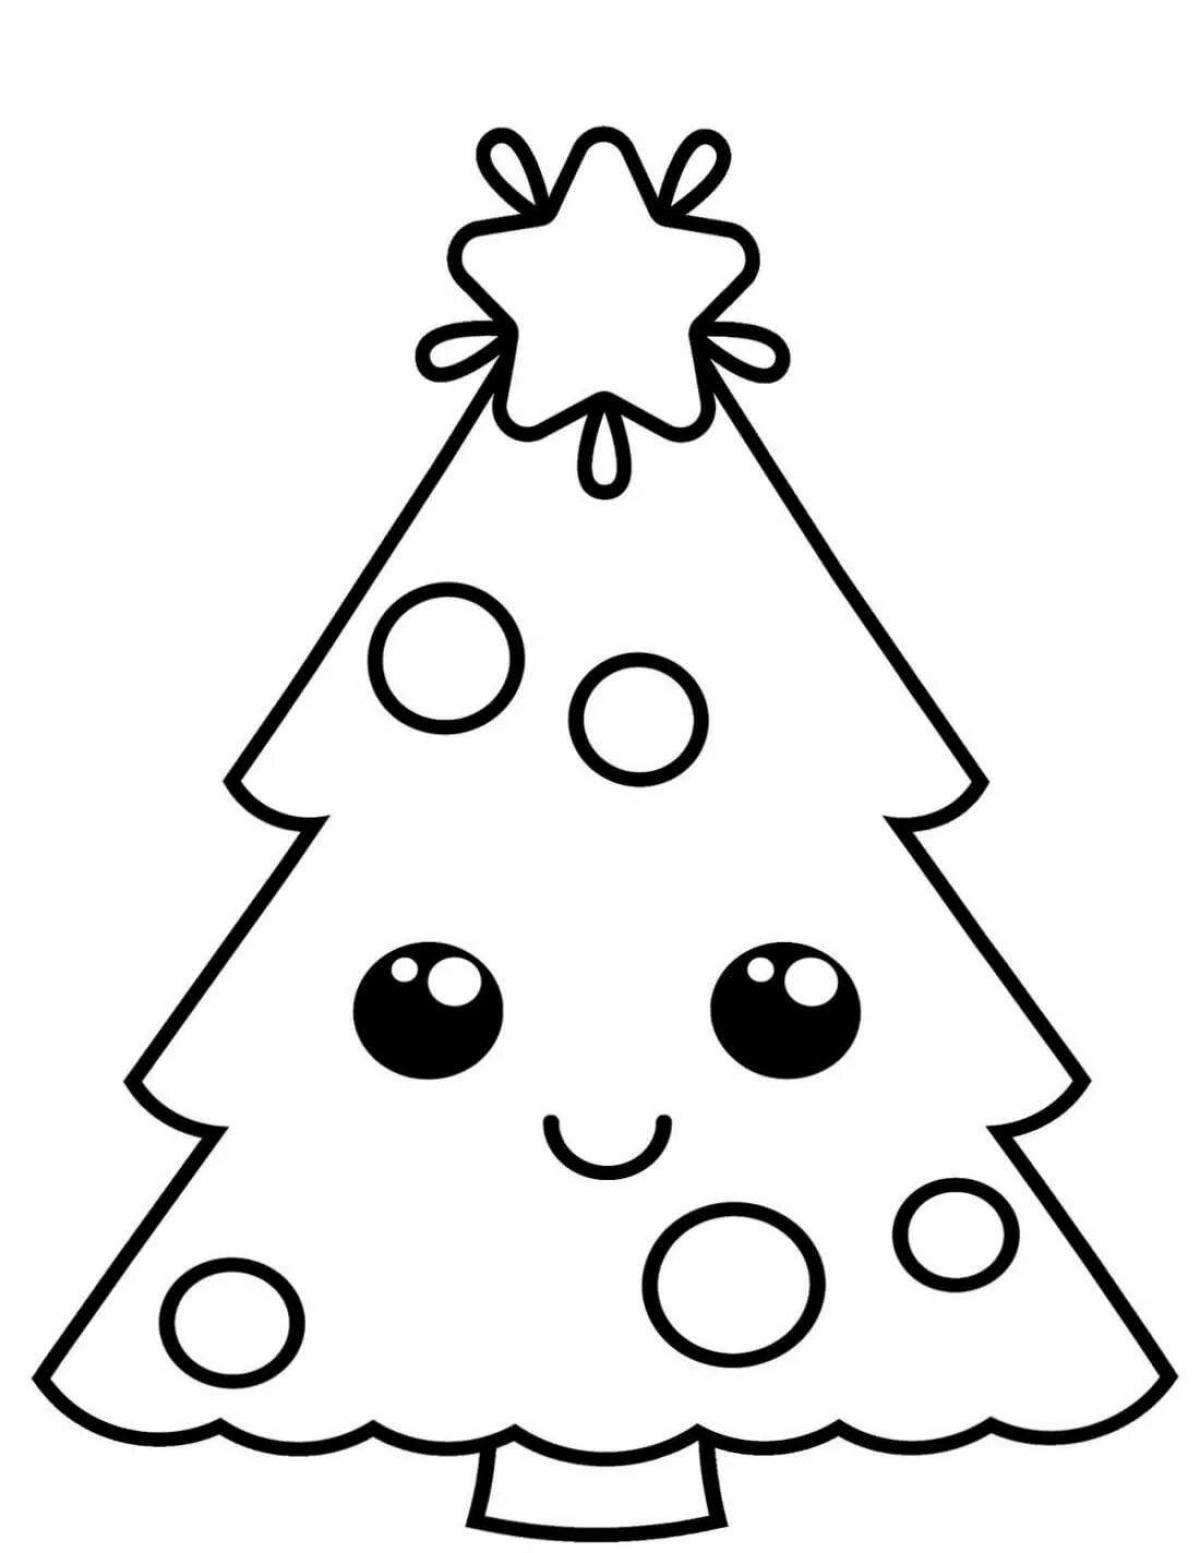 Incredible Christmas tree picture for kids